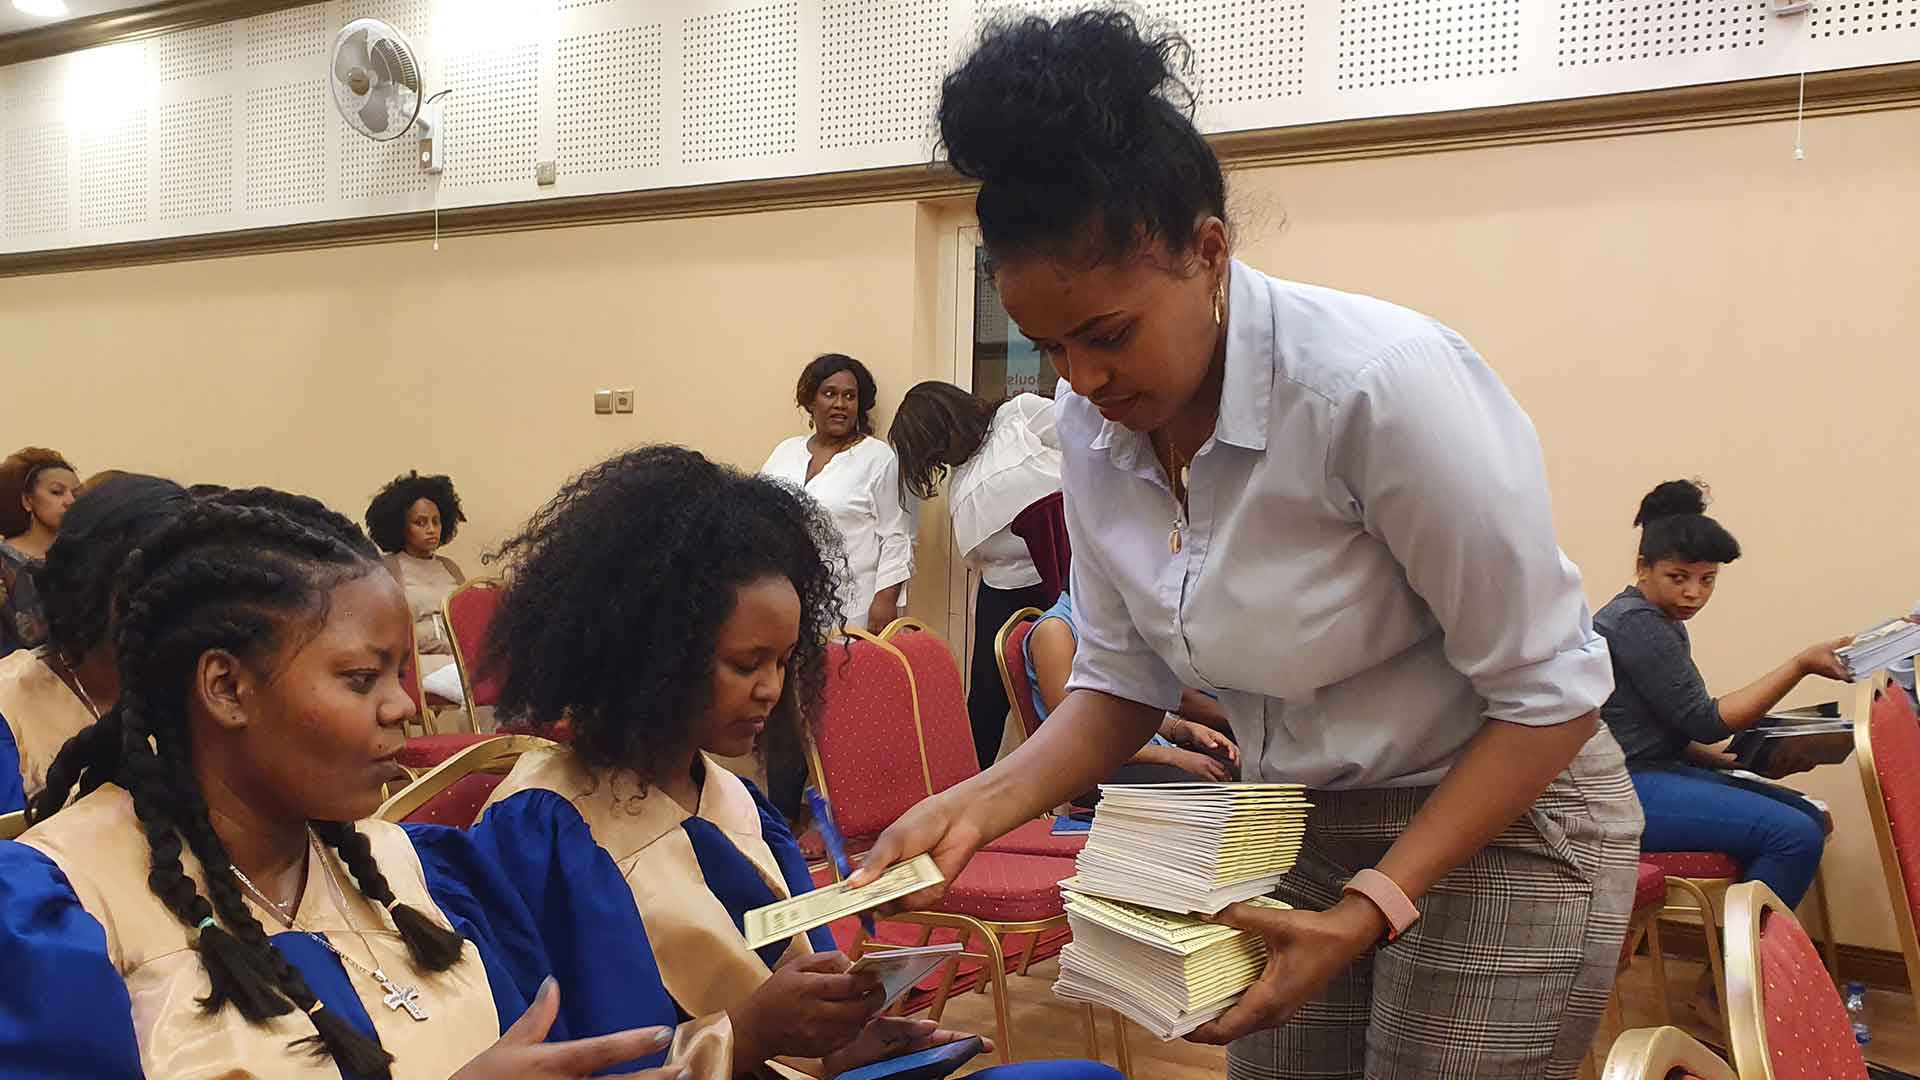 Bible mission gears up in the Gulf on eve of World Cup